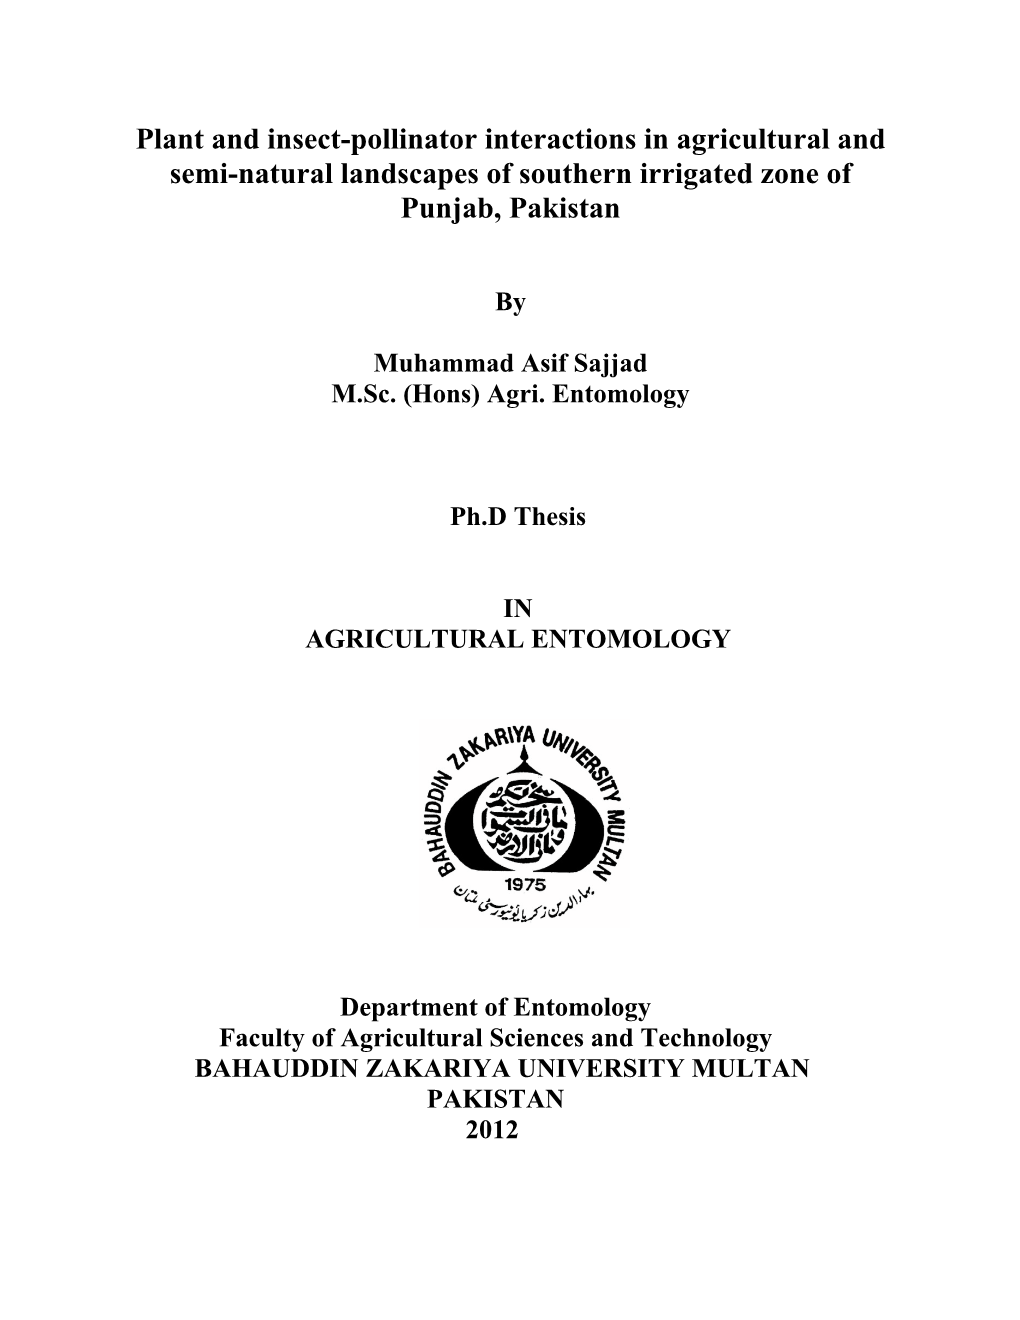 Plant and Insect-Pollinator Interactions in Agricultural and Semi-Natural Landscapes of Southern Irrigated Zone of Punjab, Pakistan